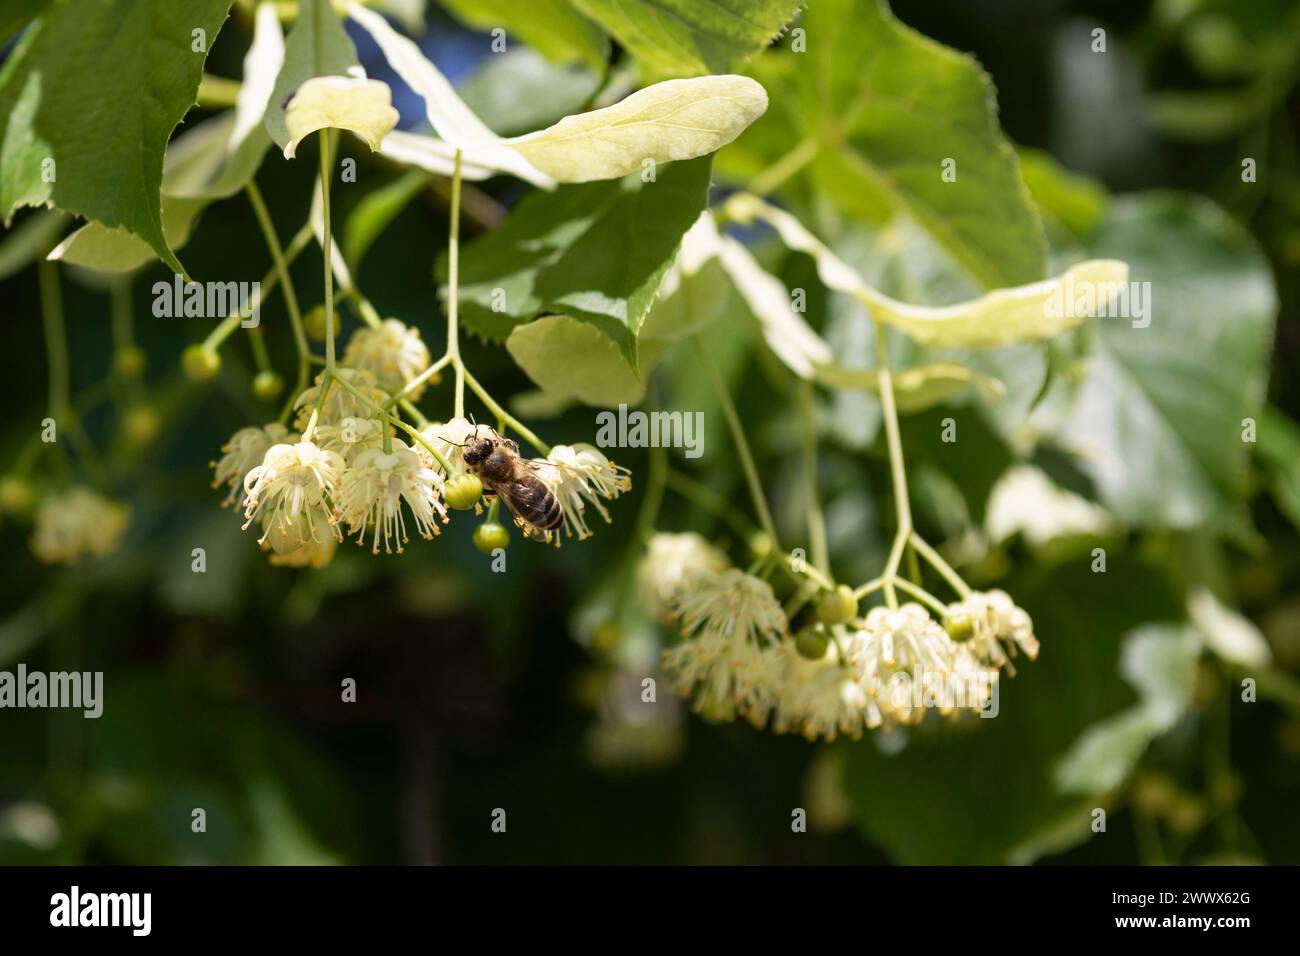 Lime Tree, Lime Blossom With Bee Stock Photo